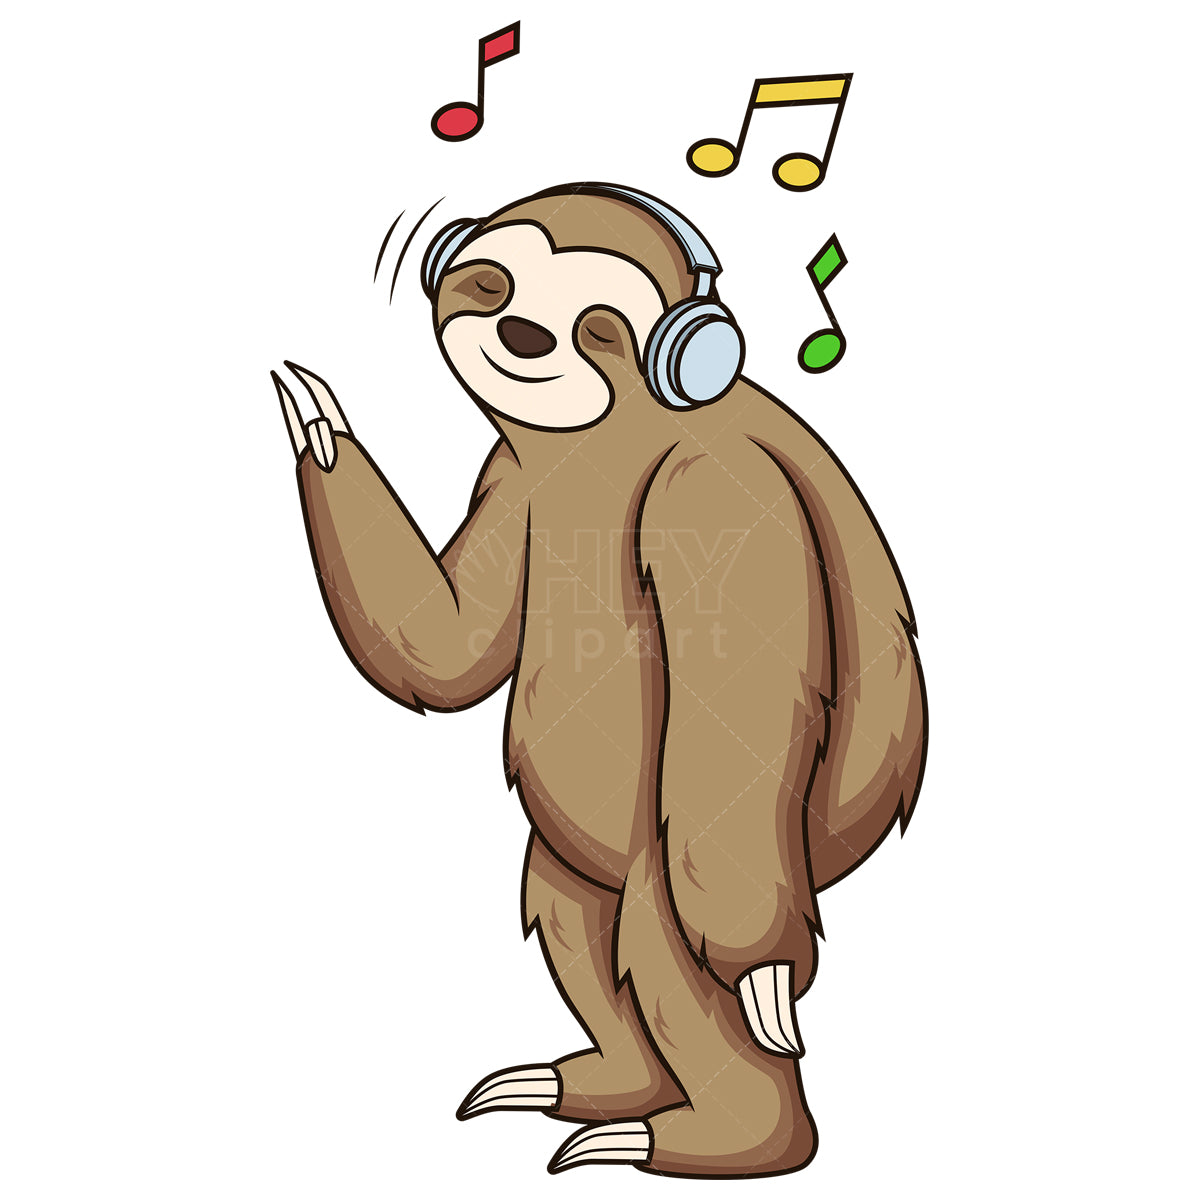 Royalty-free stock vector illustration of a sloth with headphones.